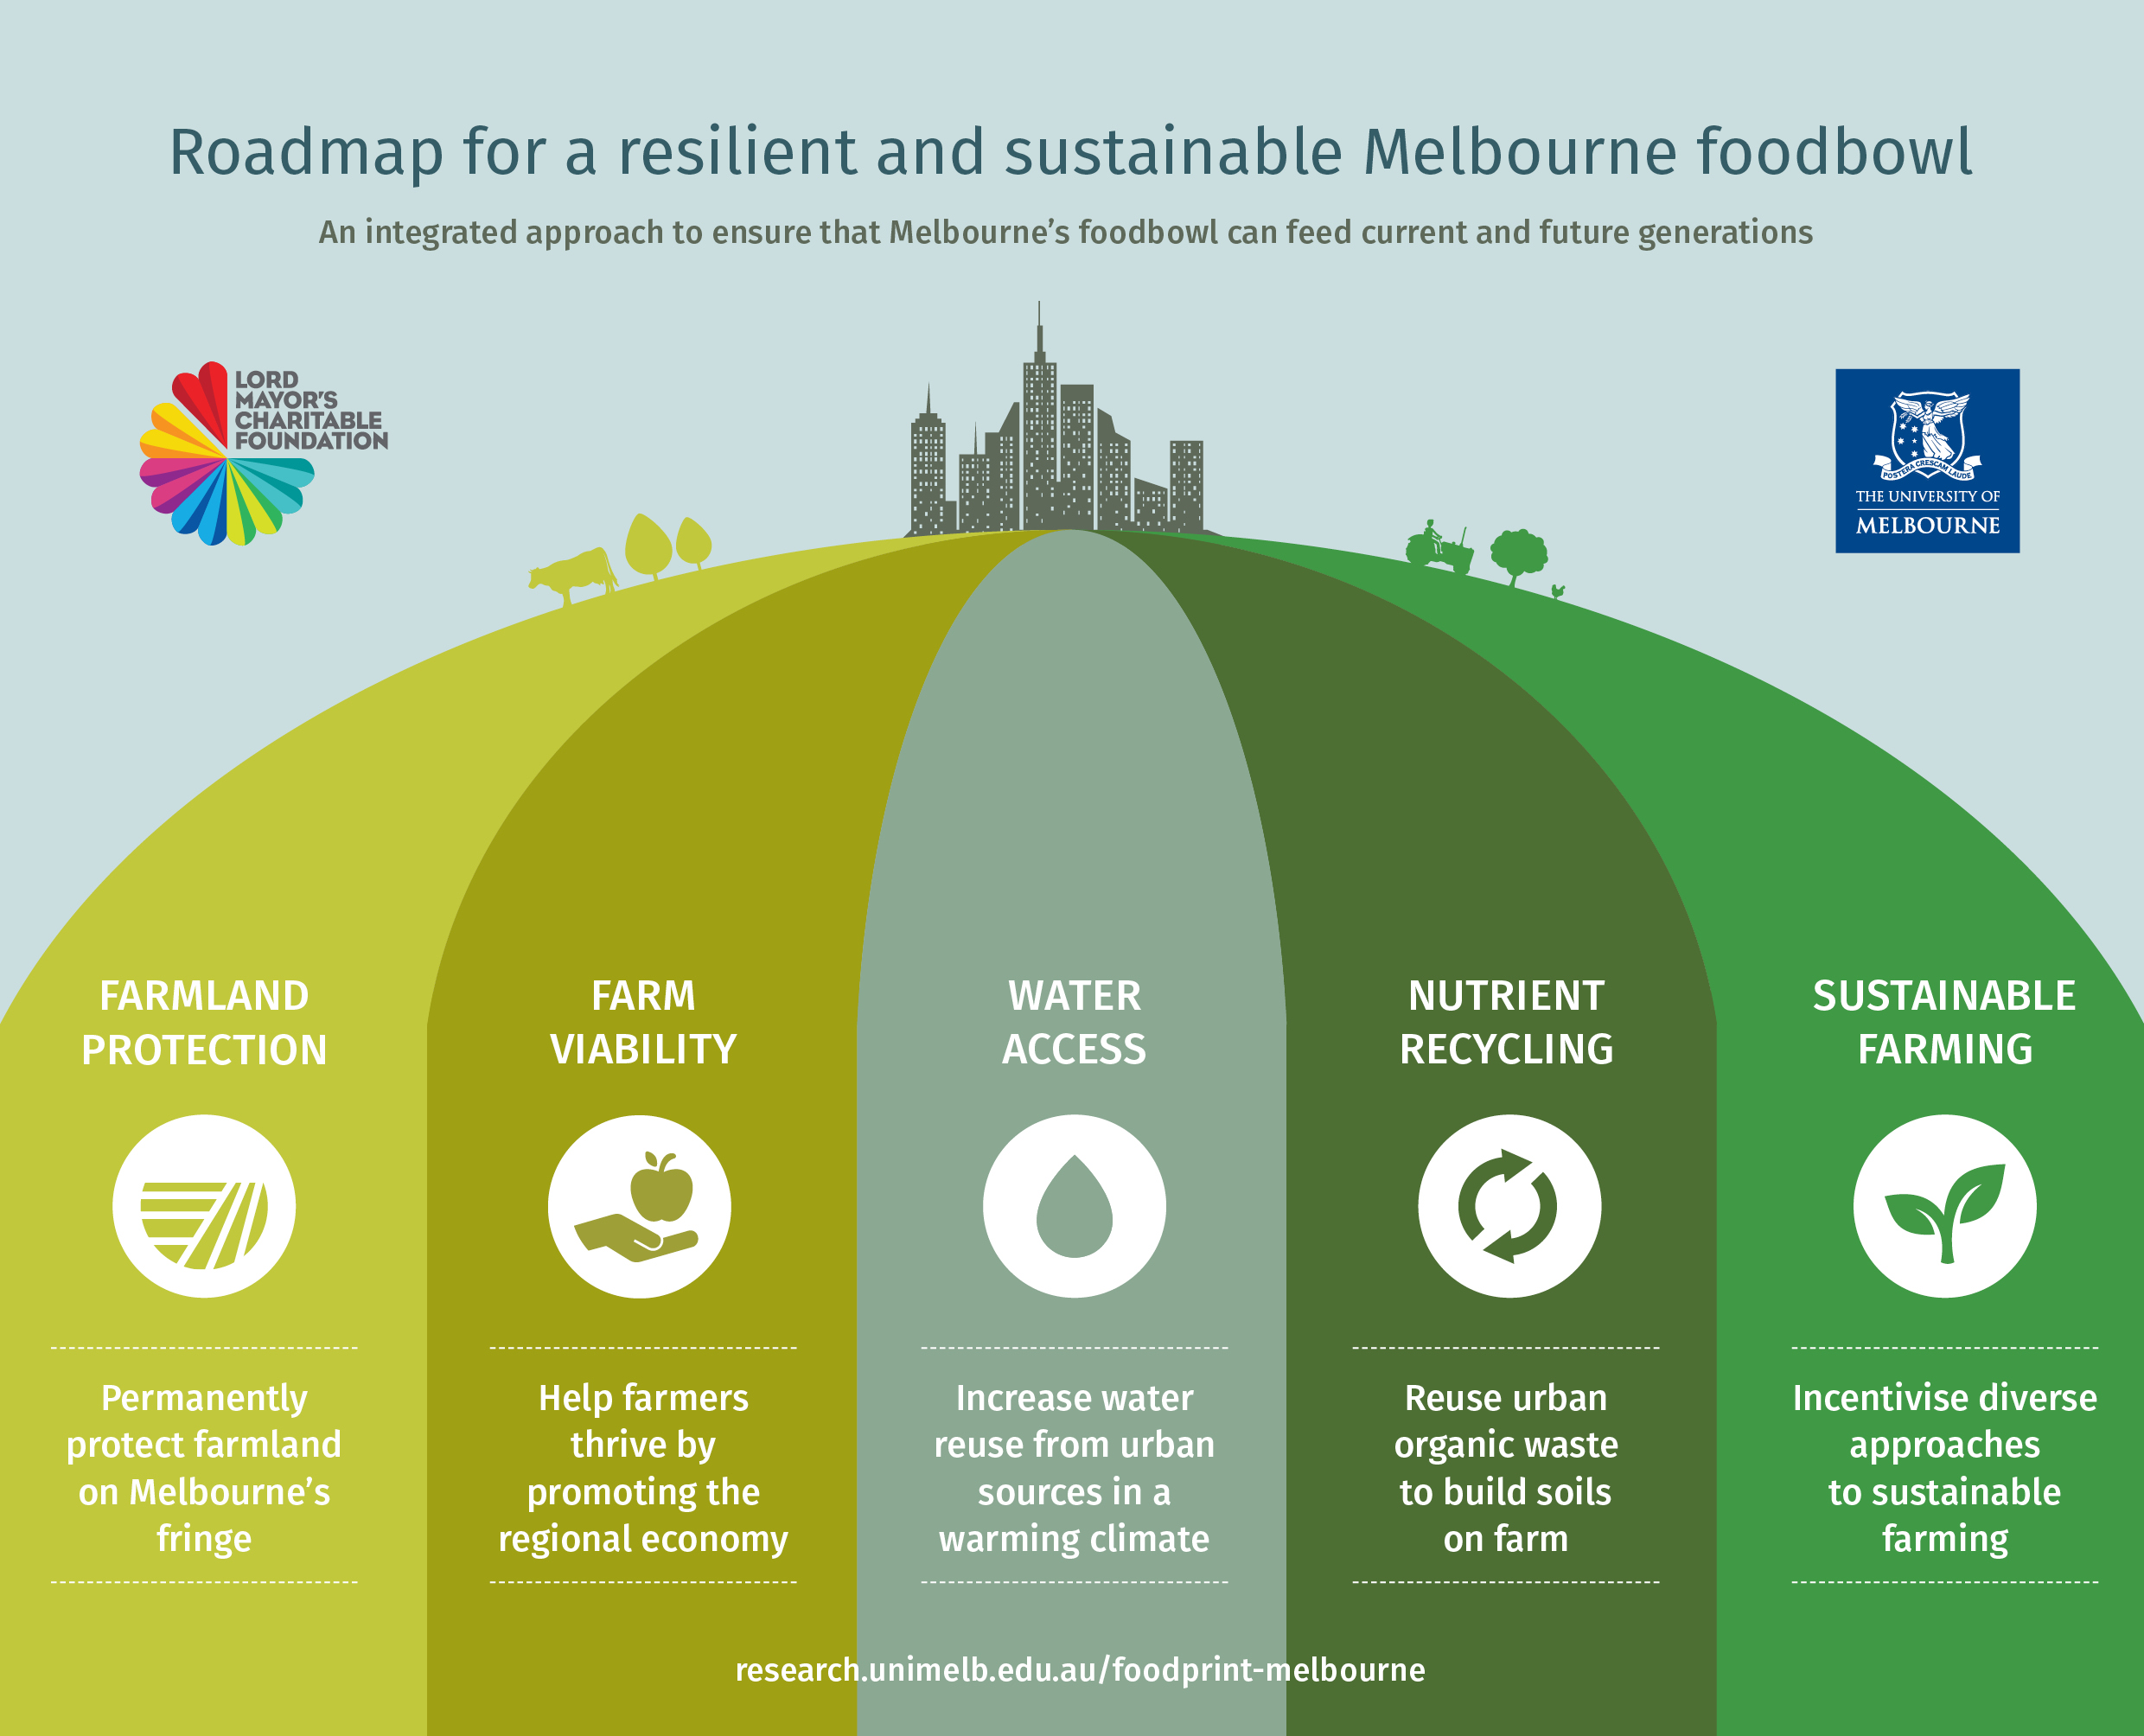 Image shows the five key policy areas - farmland protection, farm viability, water access, nutrient recycling, and sustainable farming - supporting the city of Melbourne.